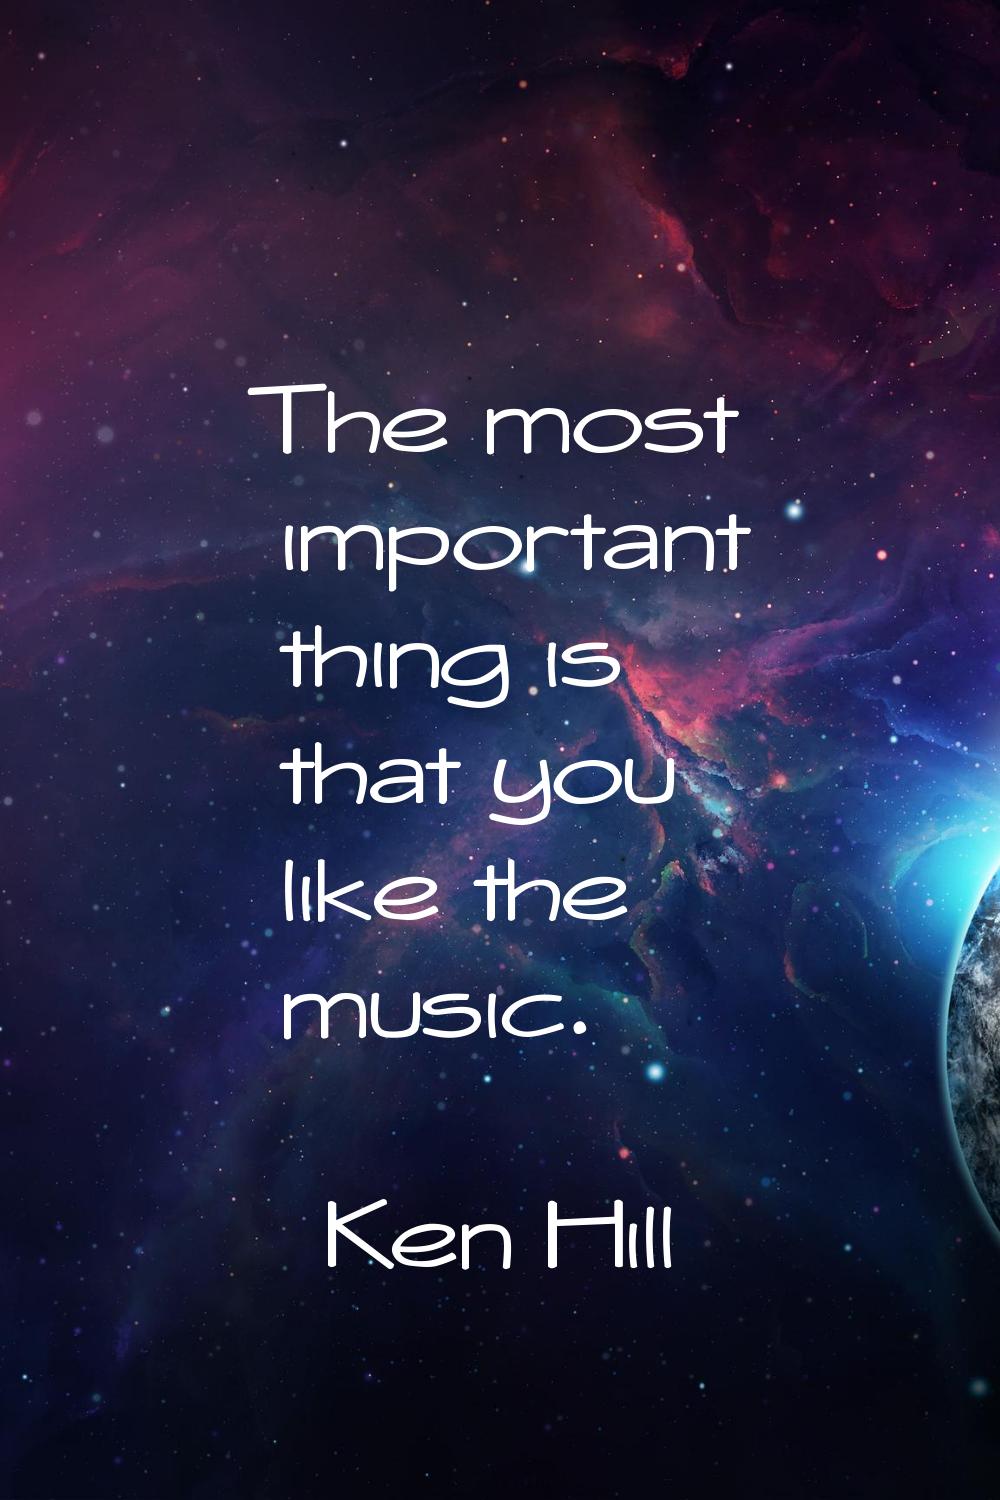 The most important thing is that you like the music.